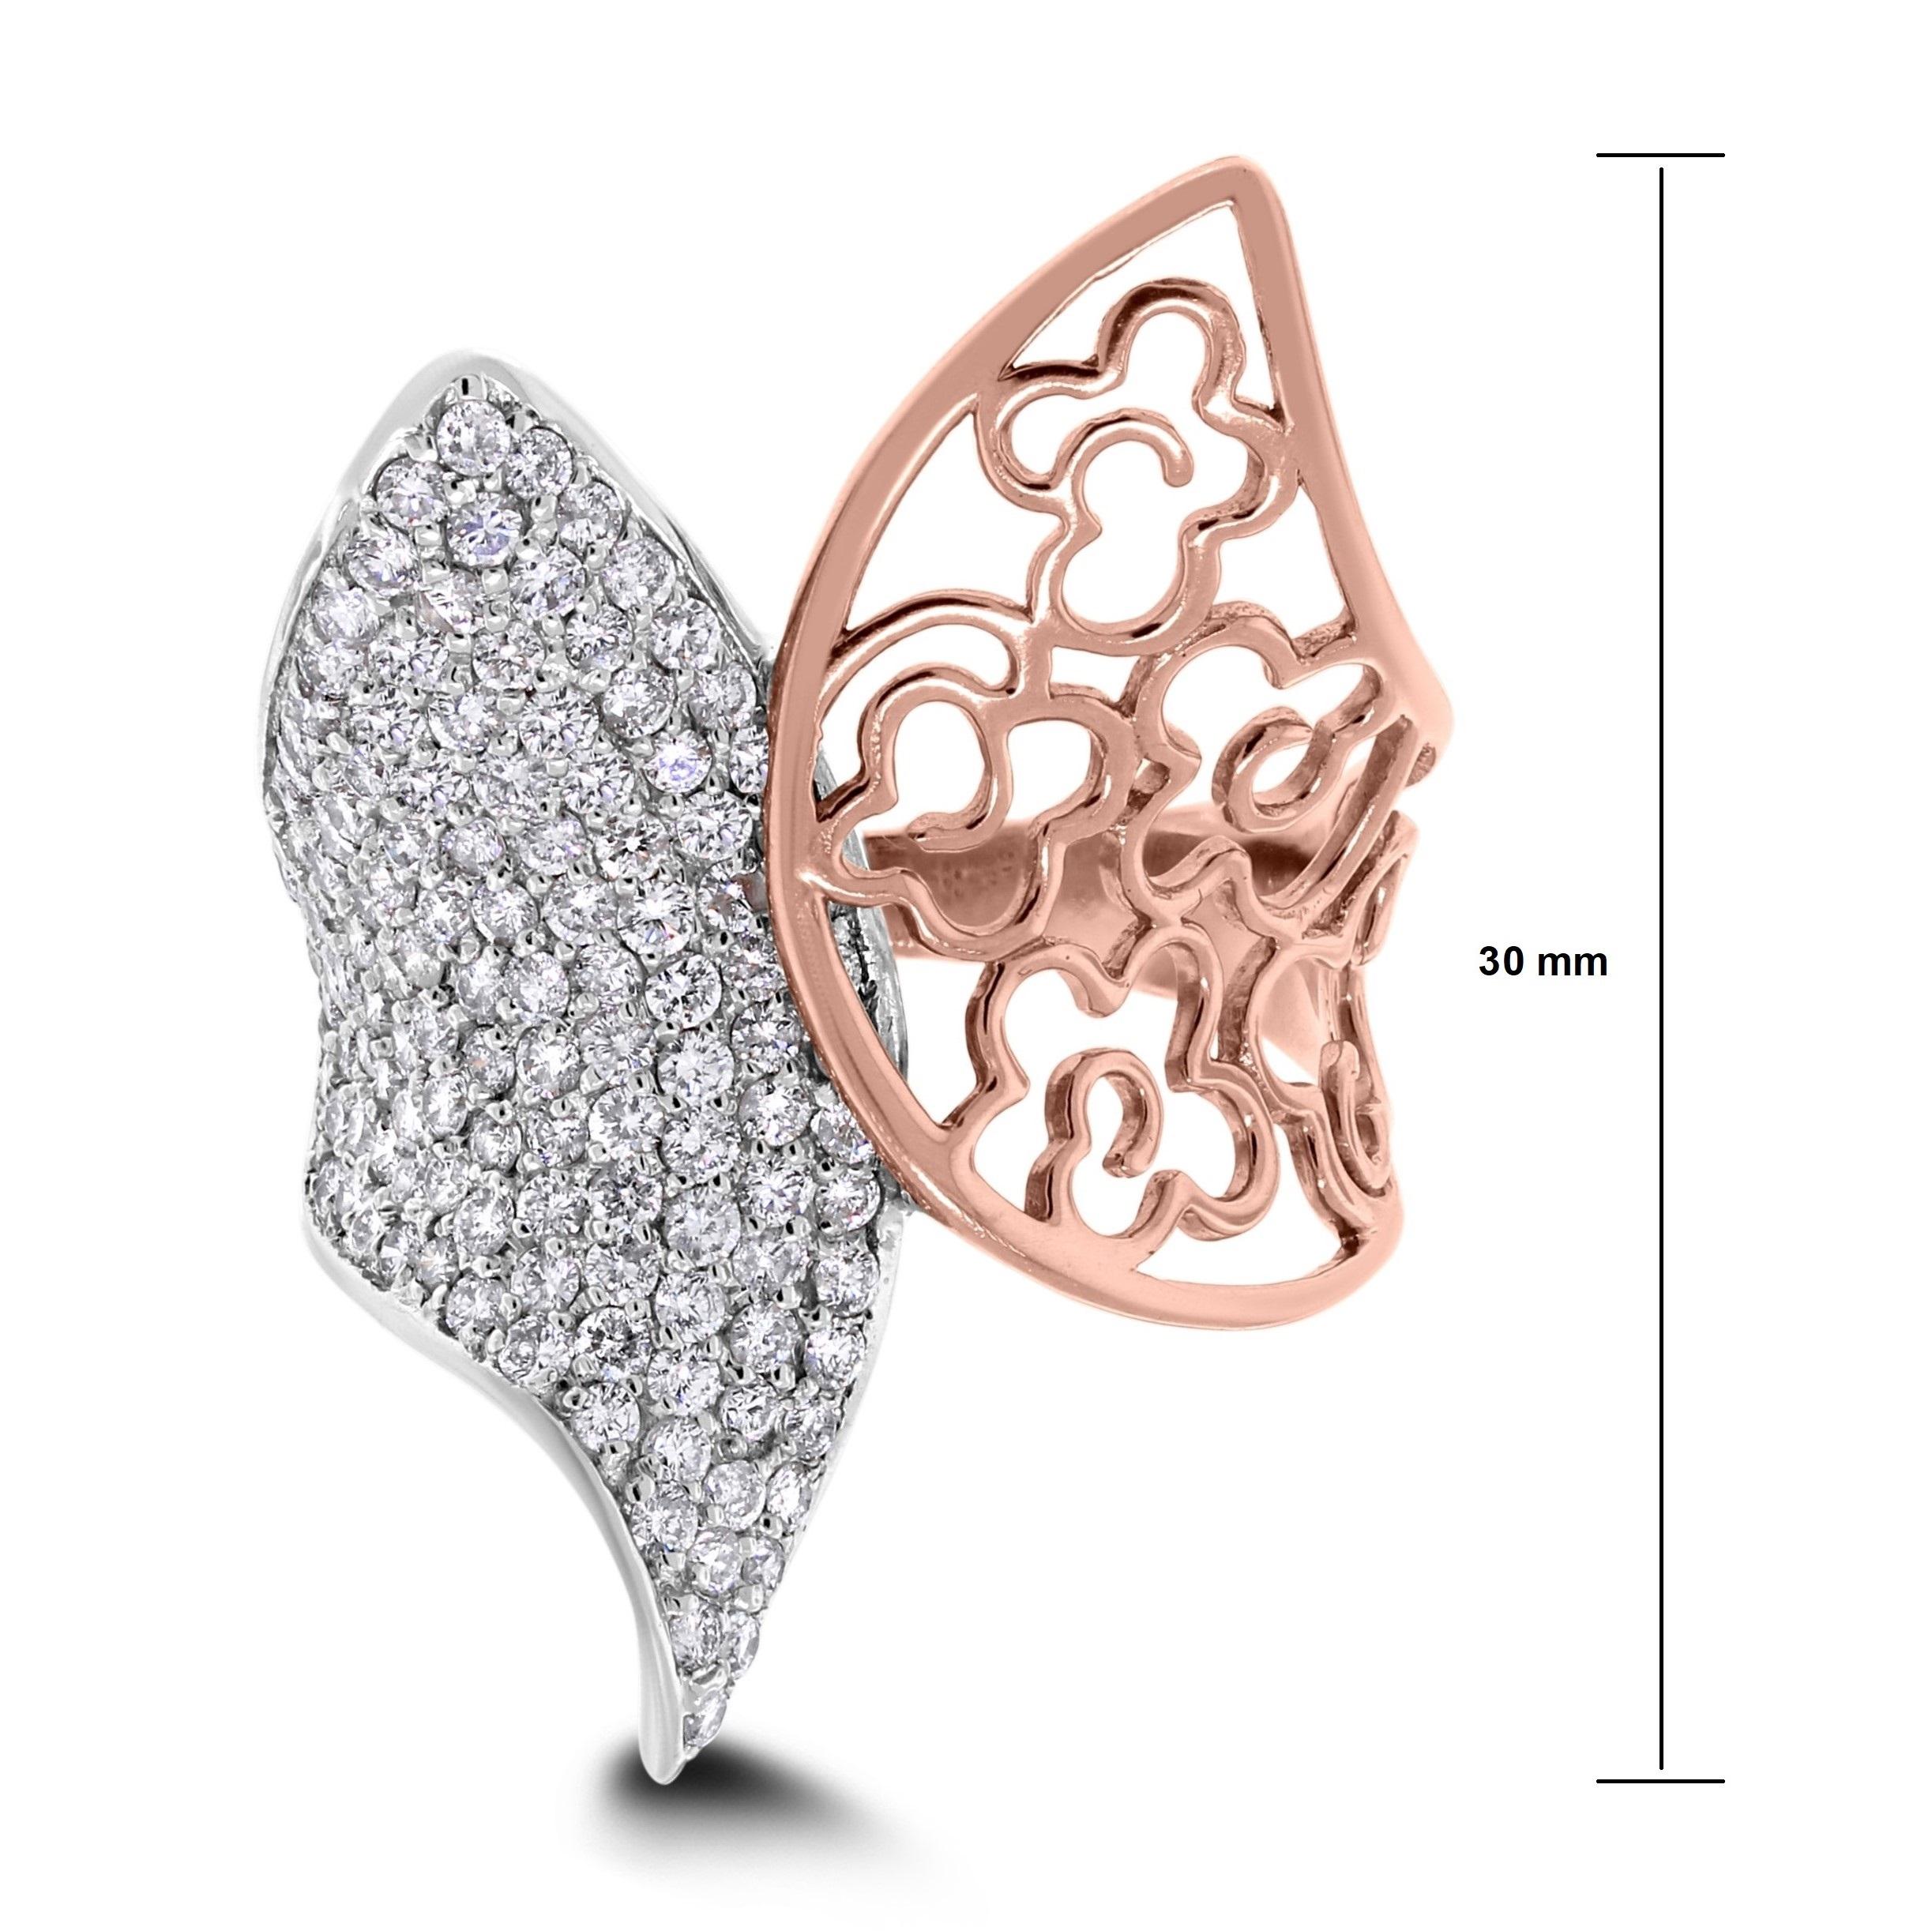 Beauvince Lolita Floral Diamond Cocktail Ring in White and Rose Gold In New Condition For Sale In New York, NY